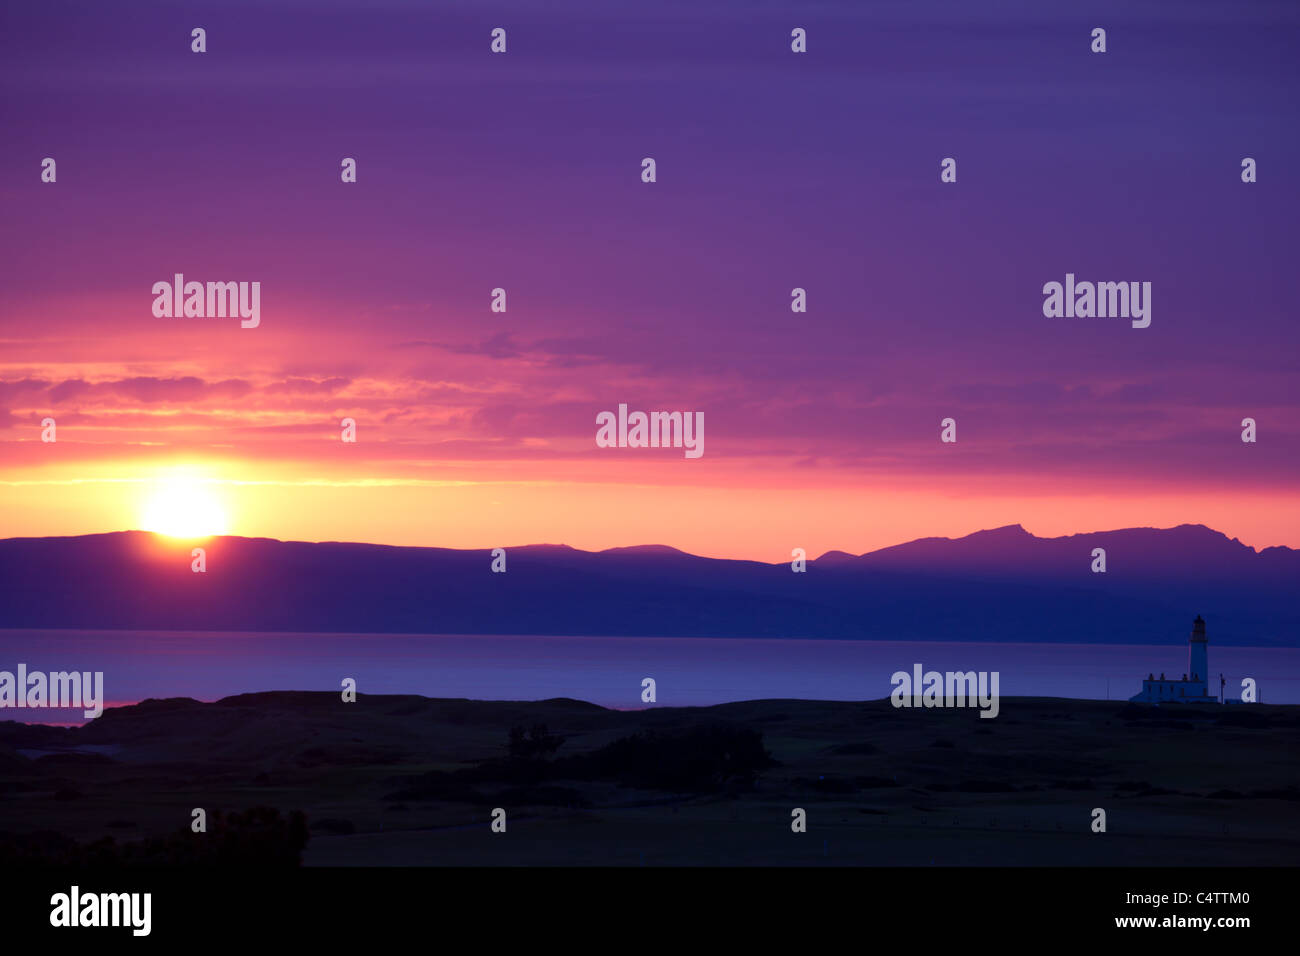 sunset over mountains and ocean Stock Photo